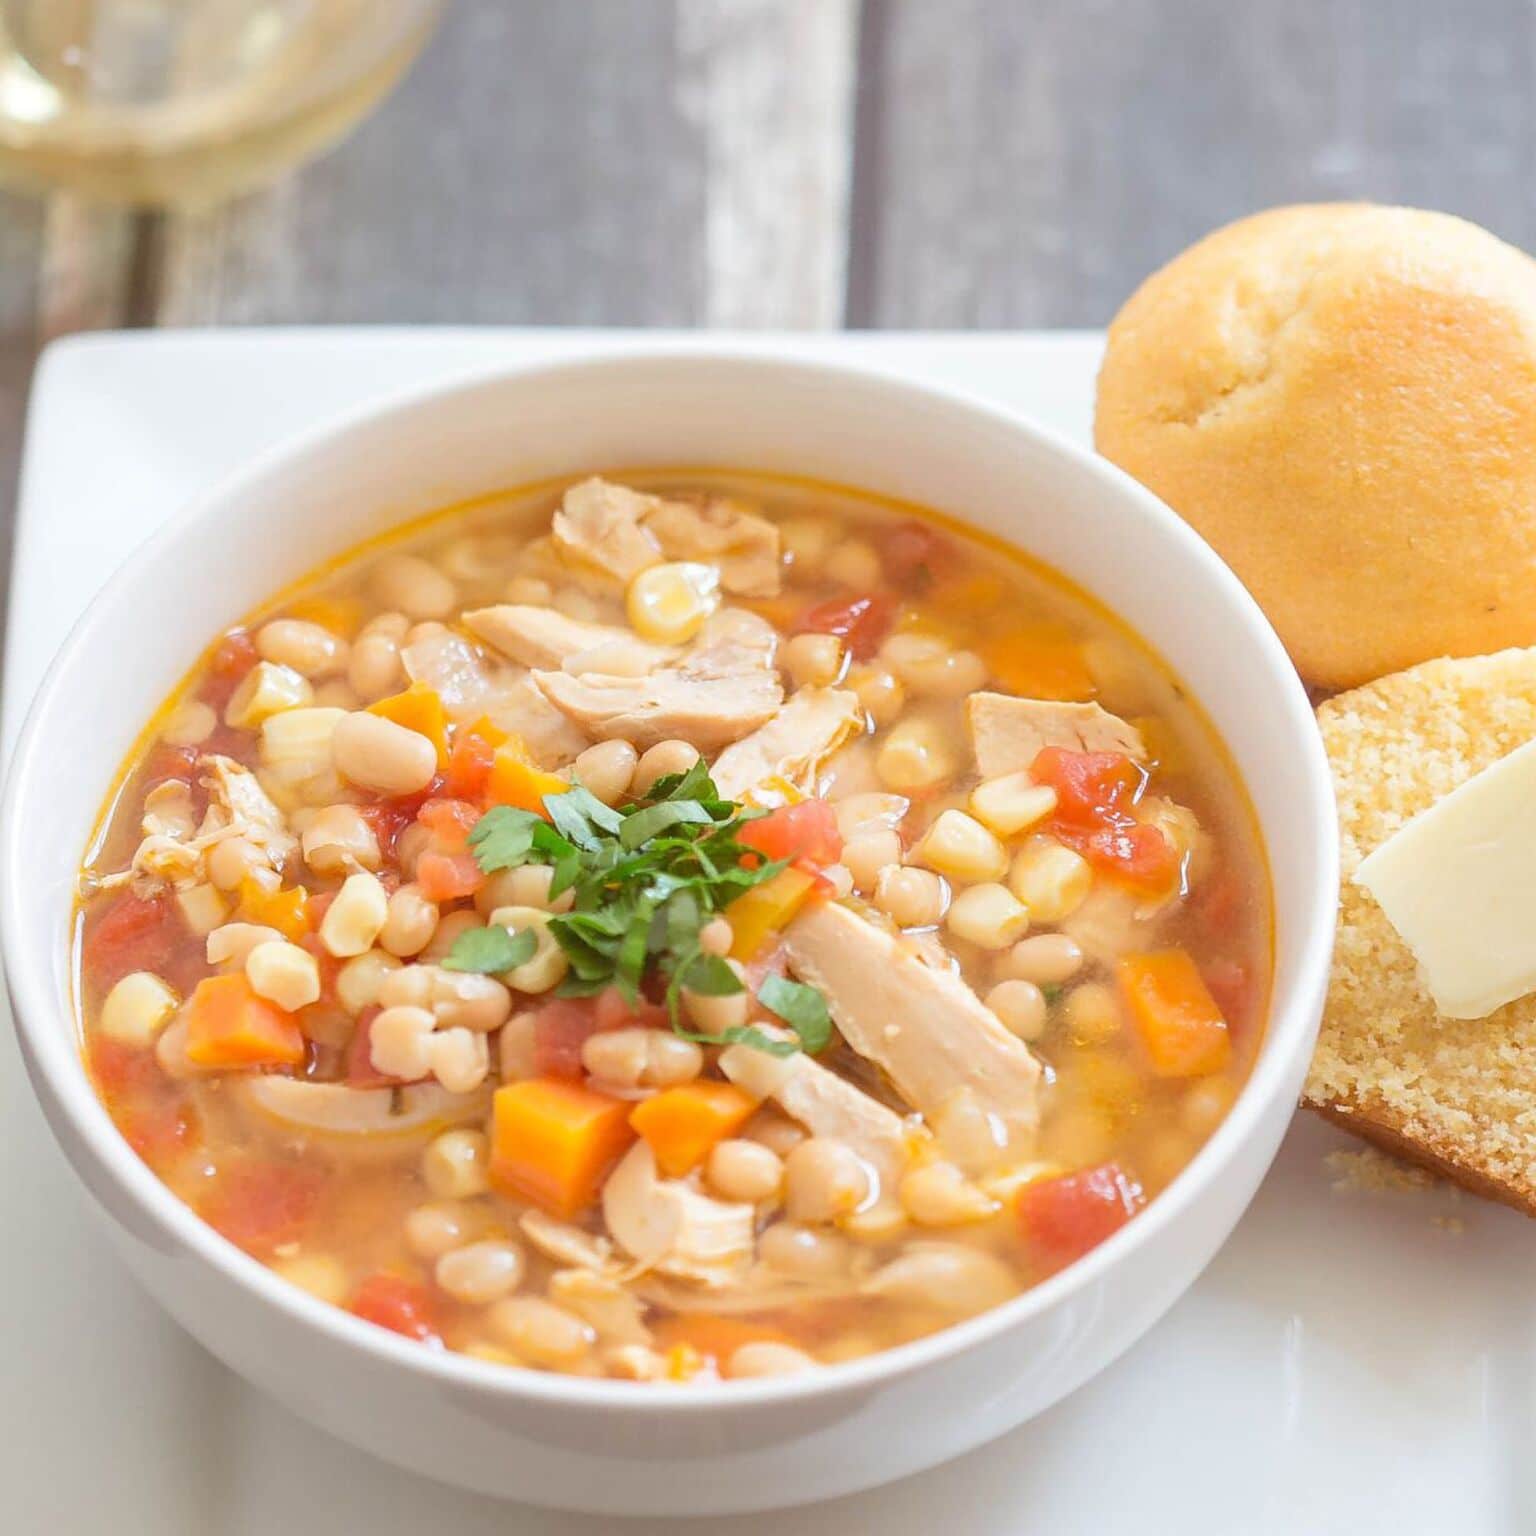 Spicy Chicken and Bean Soup | Living Well Spending Less®